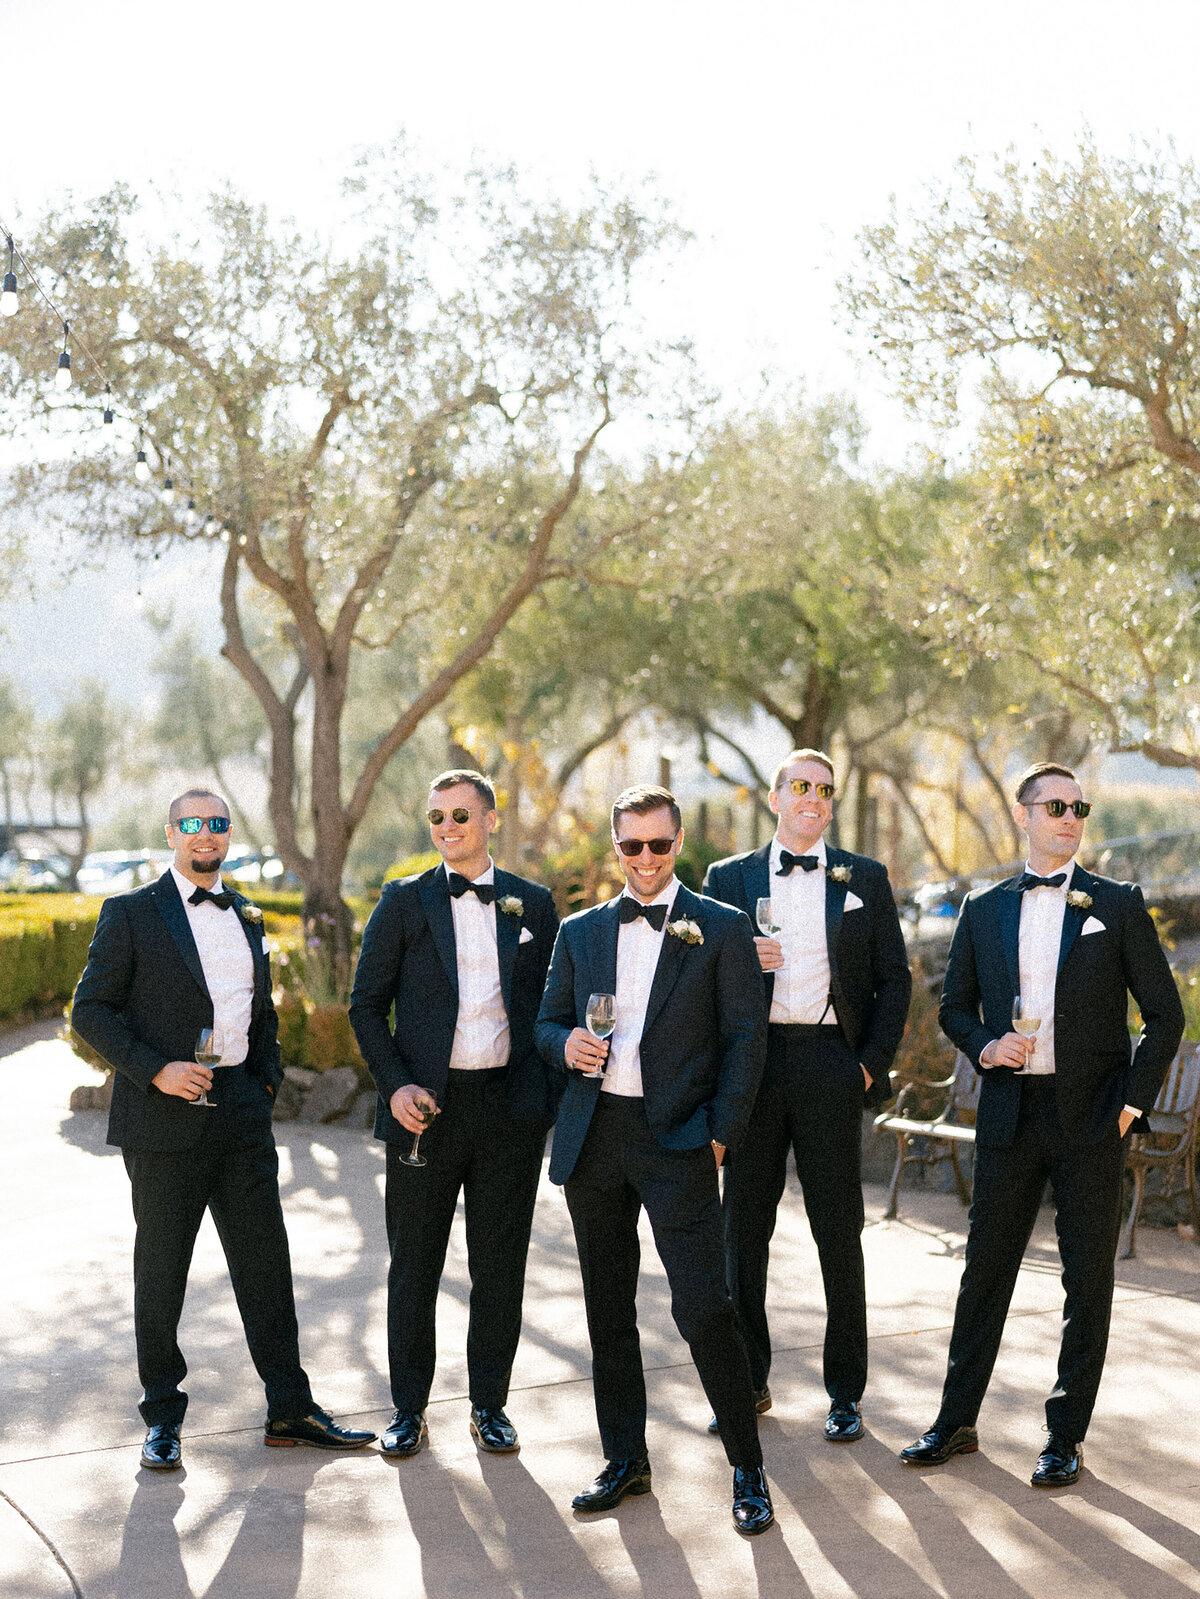 Groomsmen happily posing for photo photographed by Chicago editorial wedding photographer Arielle Peters